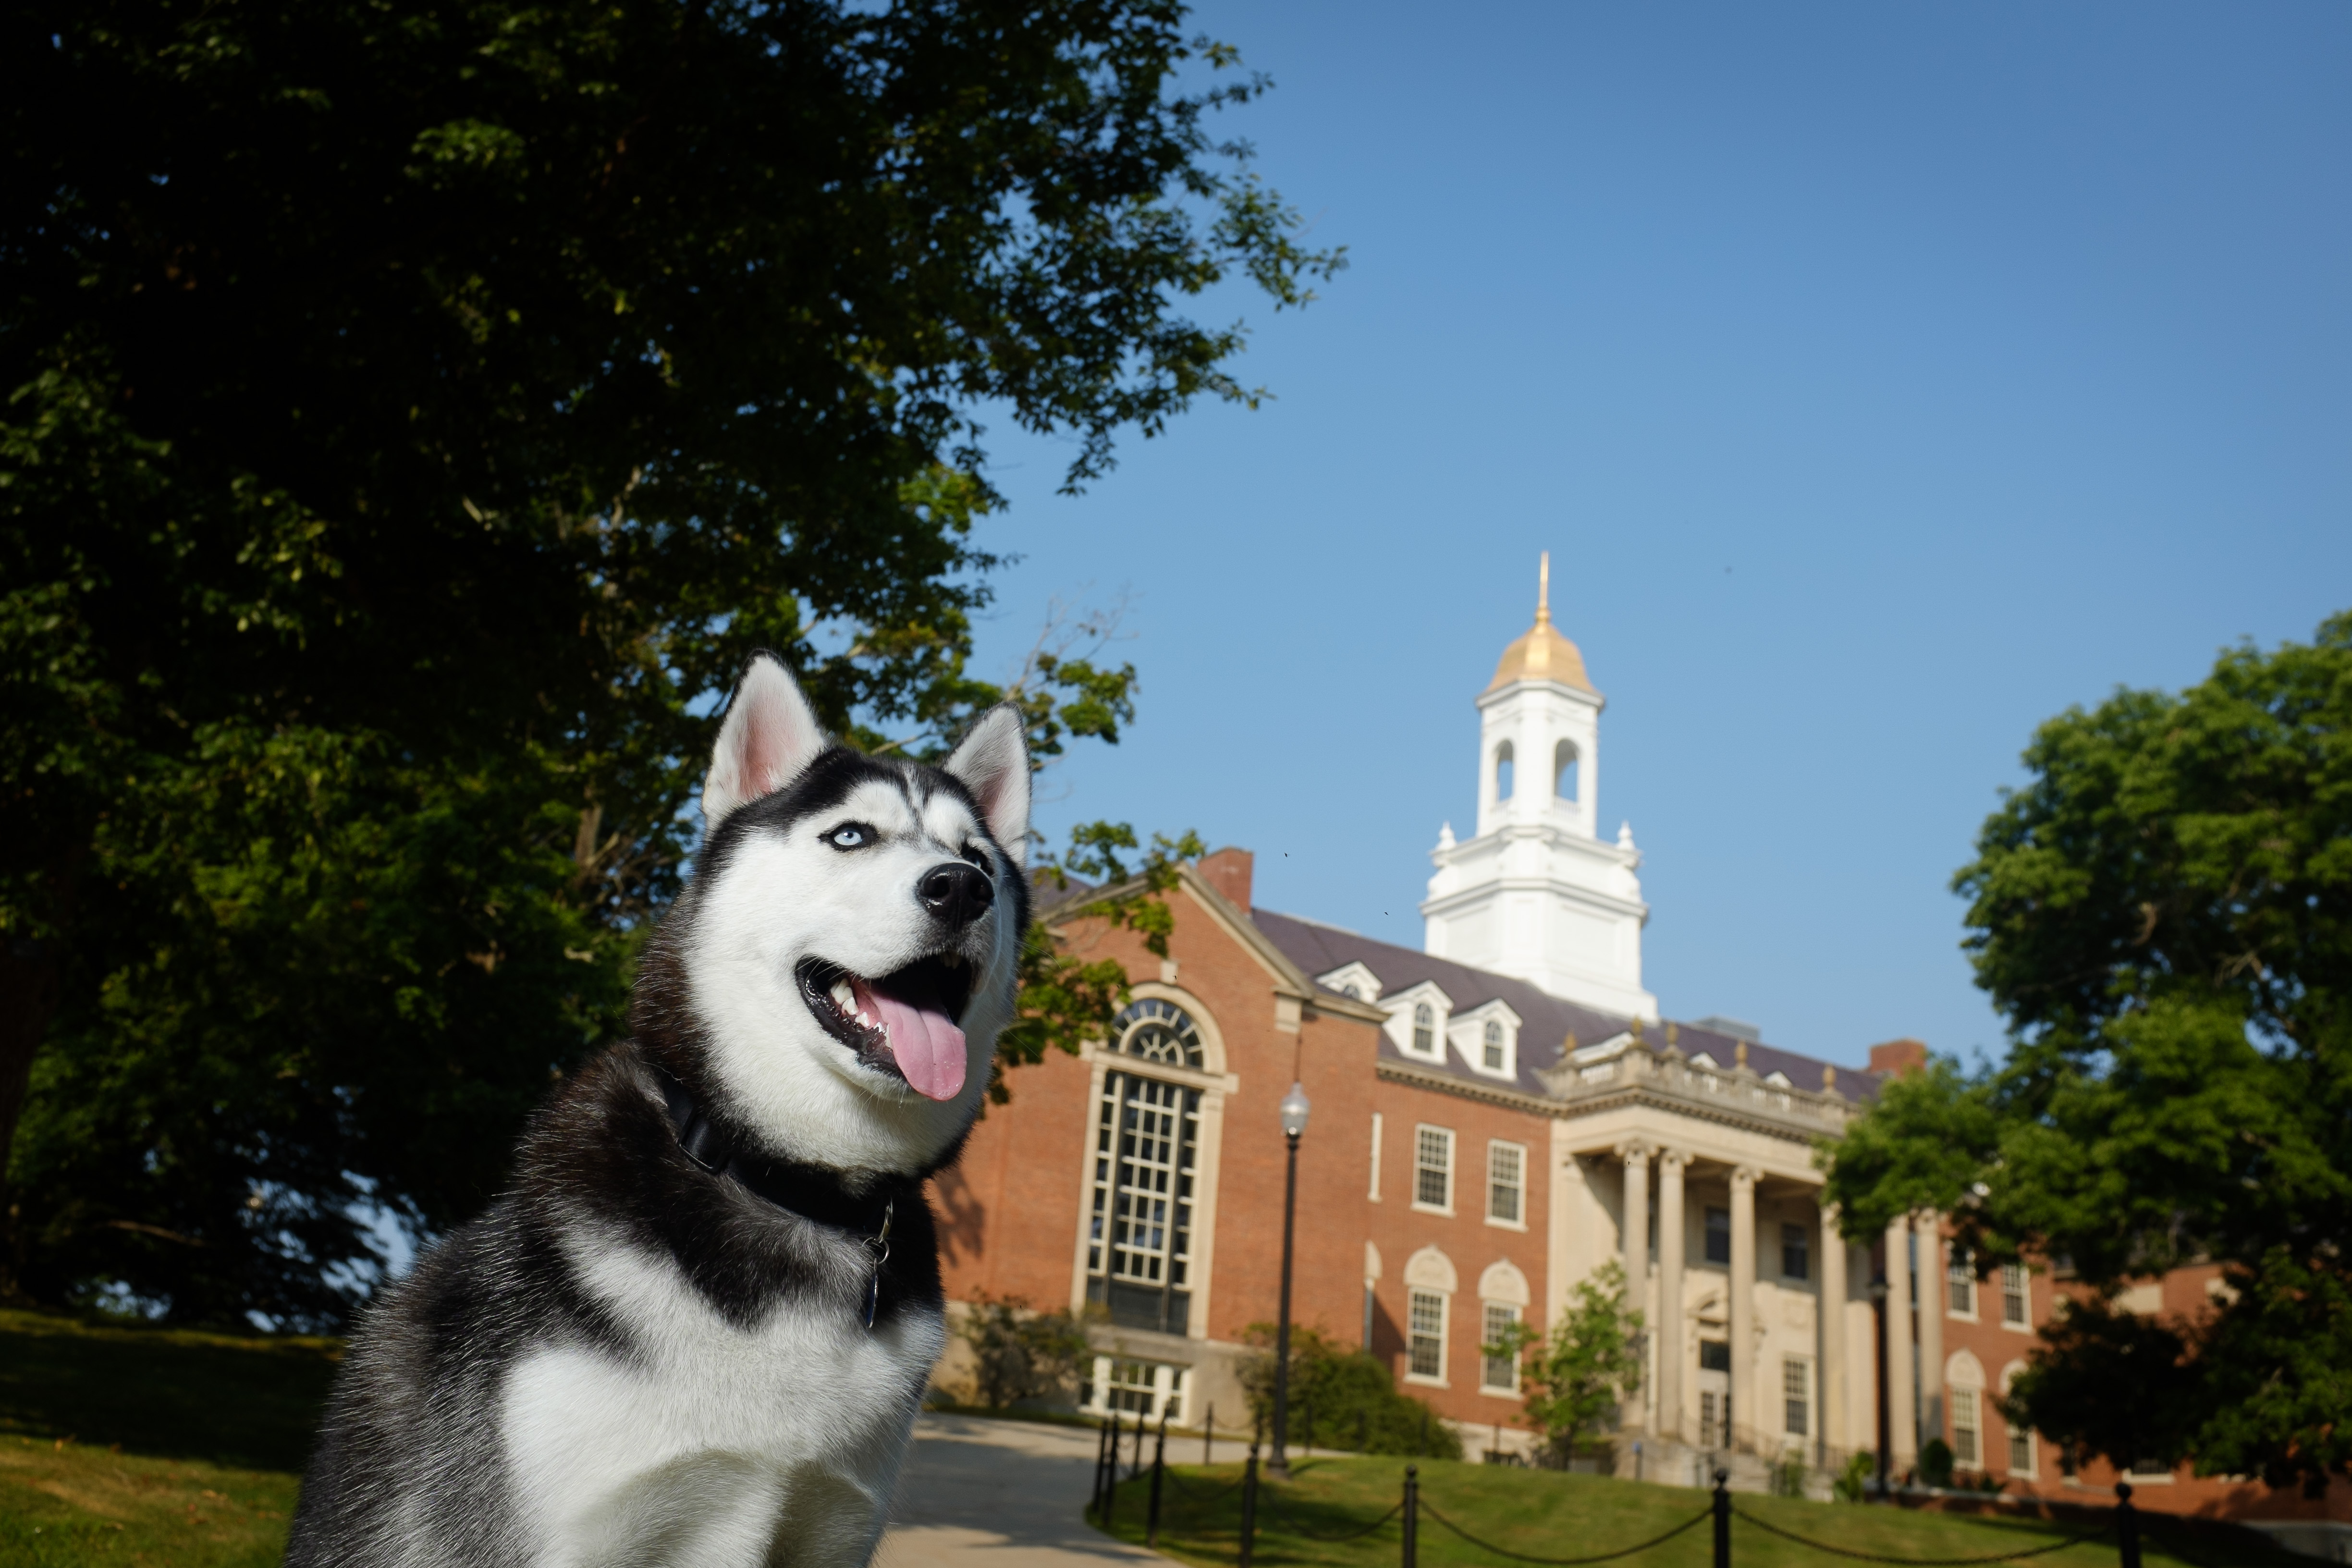 Mascot Jonathan XIV poses for a photo outside the Wilbur Cross Building on July 22, 2014. (Peter Morenus/UConn Photo)